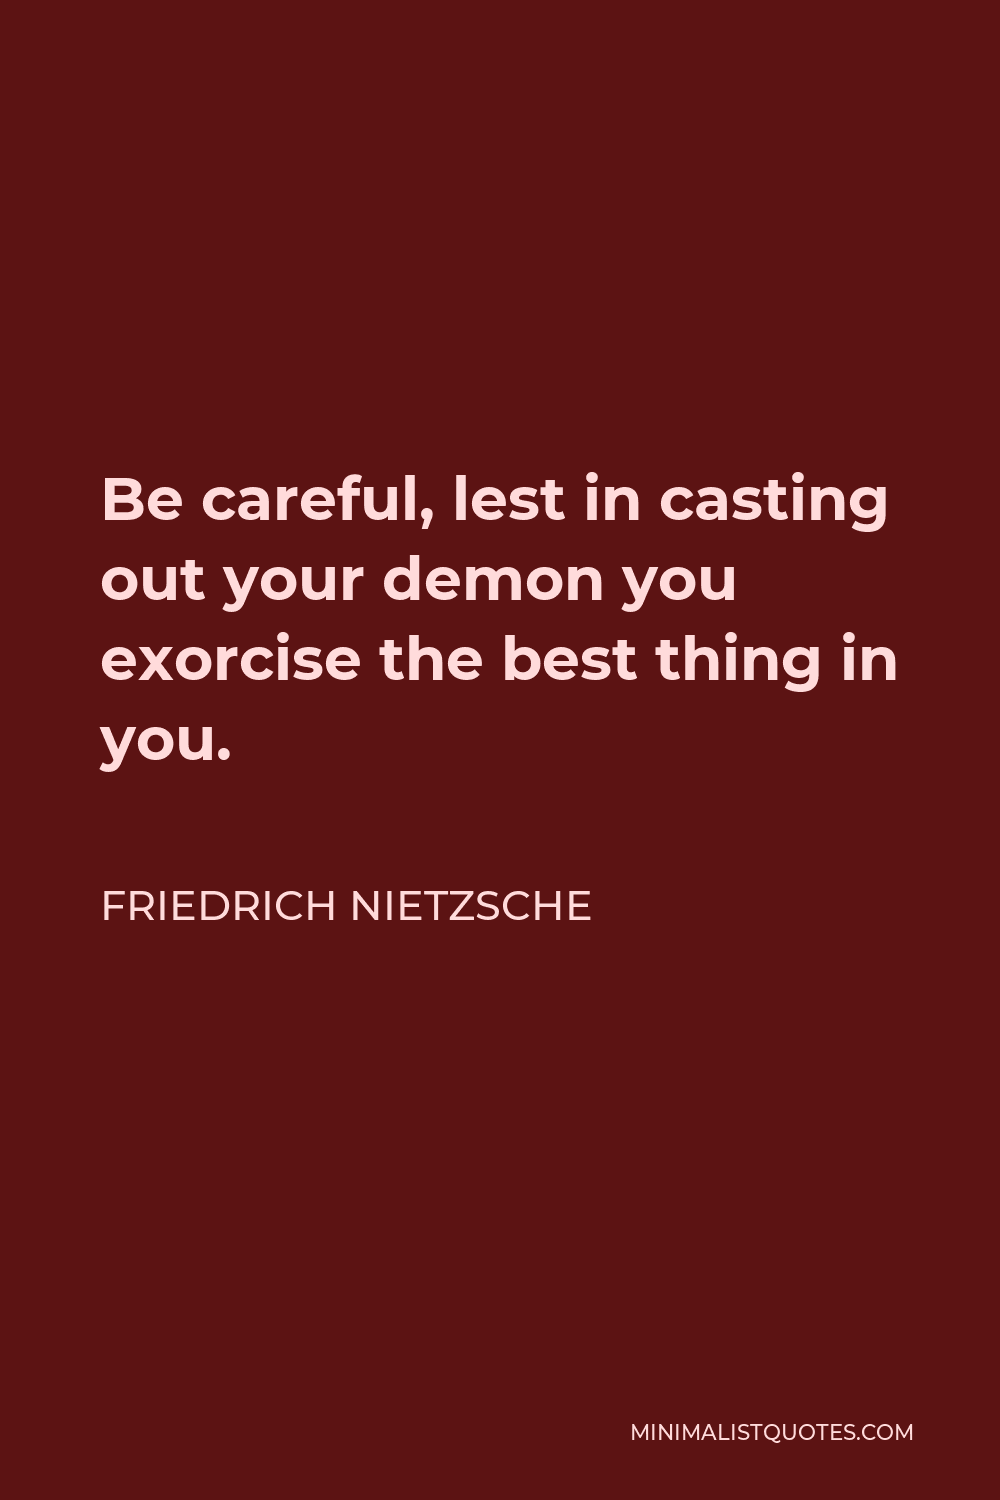 Friedrich Nietzsche Quote - Be careful, lest in casting out your demon you exorcise the best thing in you.